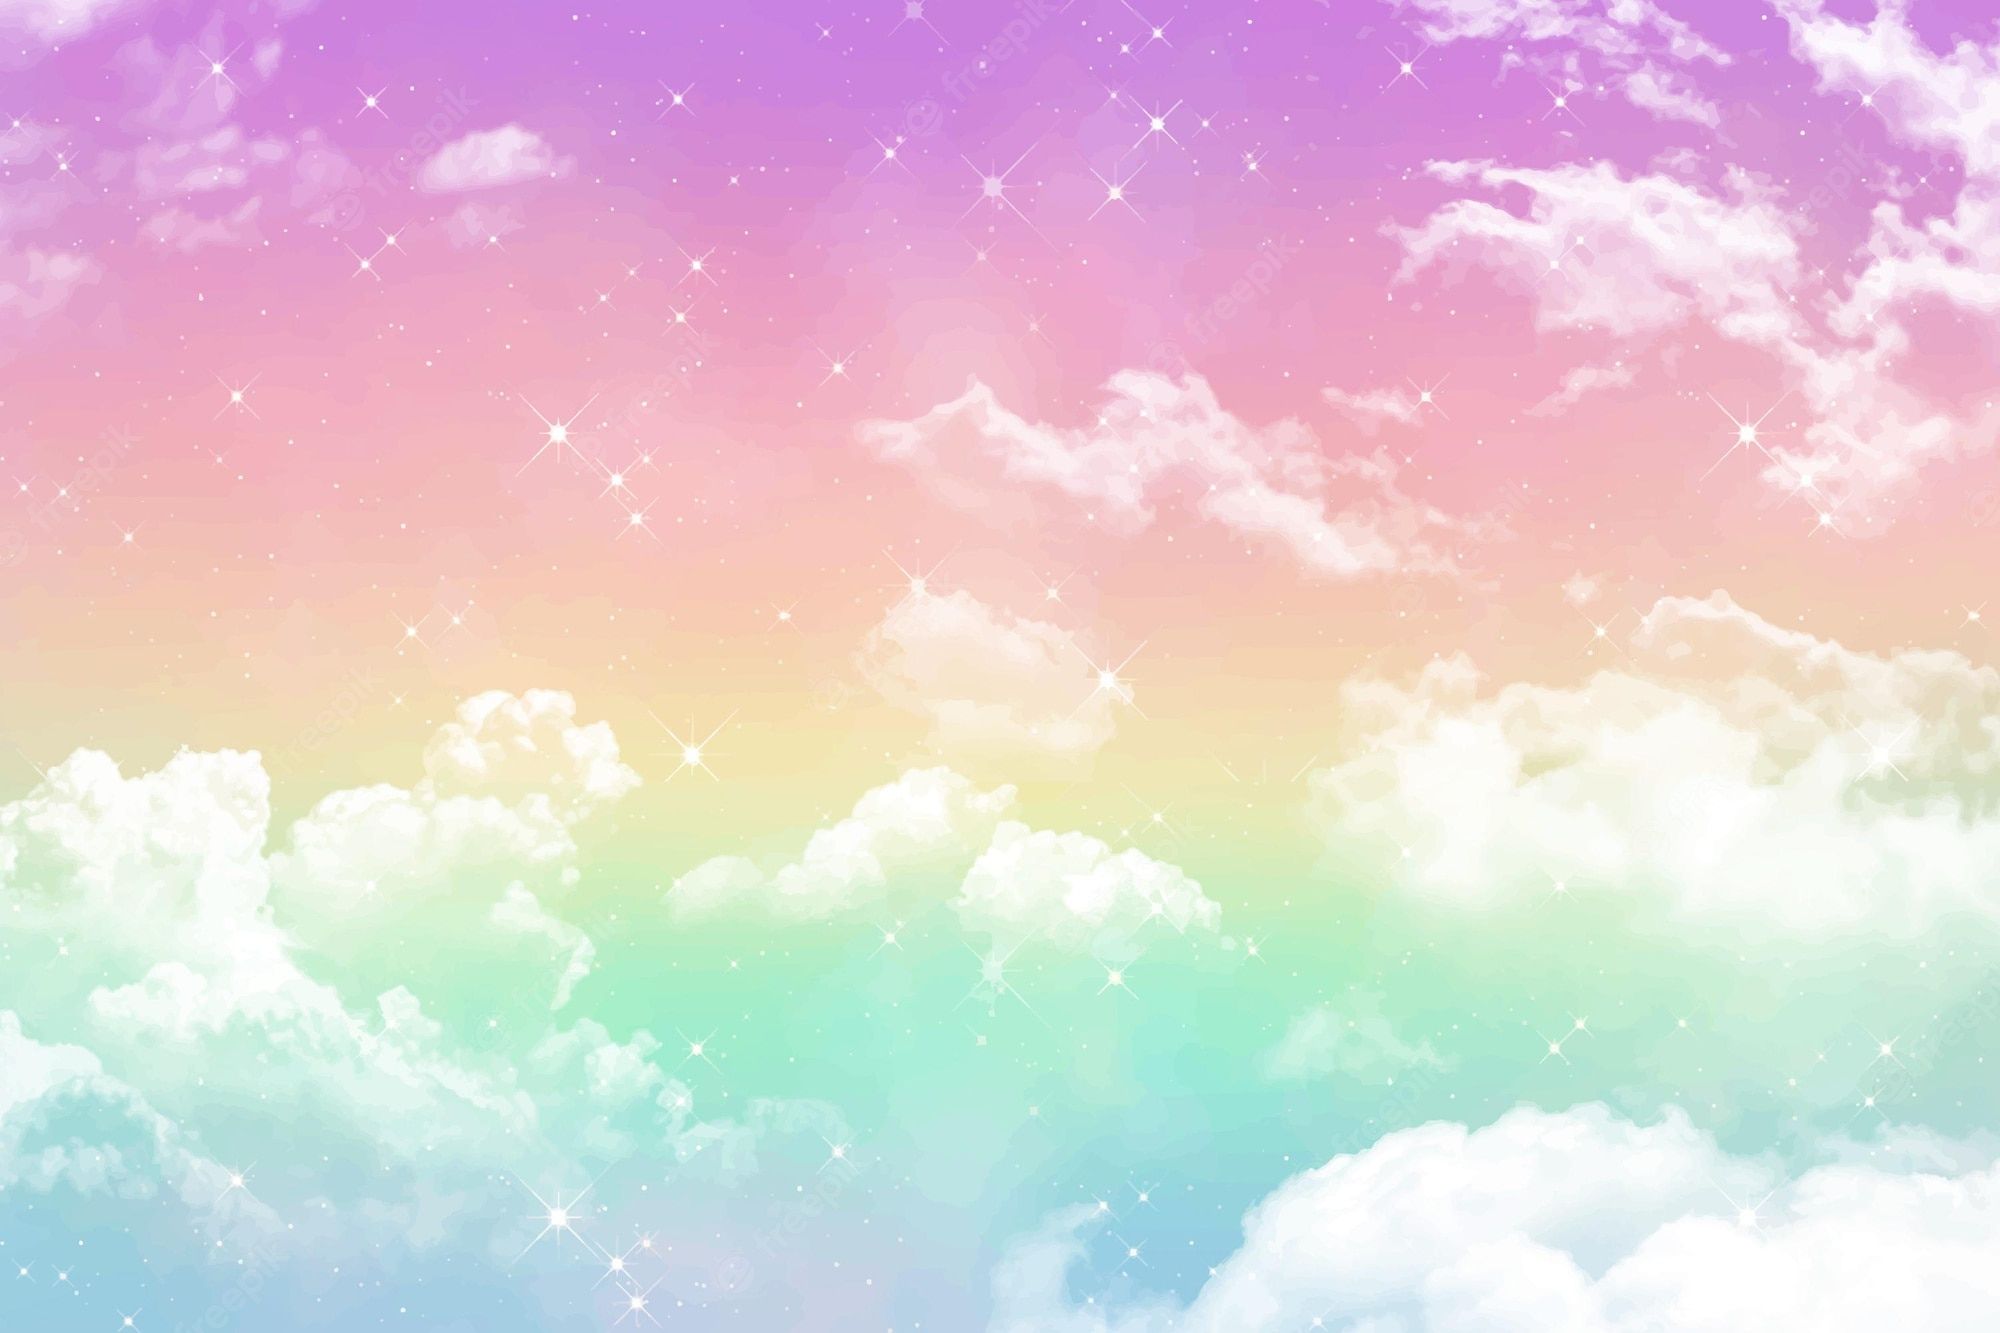 A rainbow sky with clouds and stars - Pastel rainbow